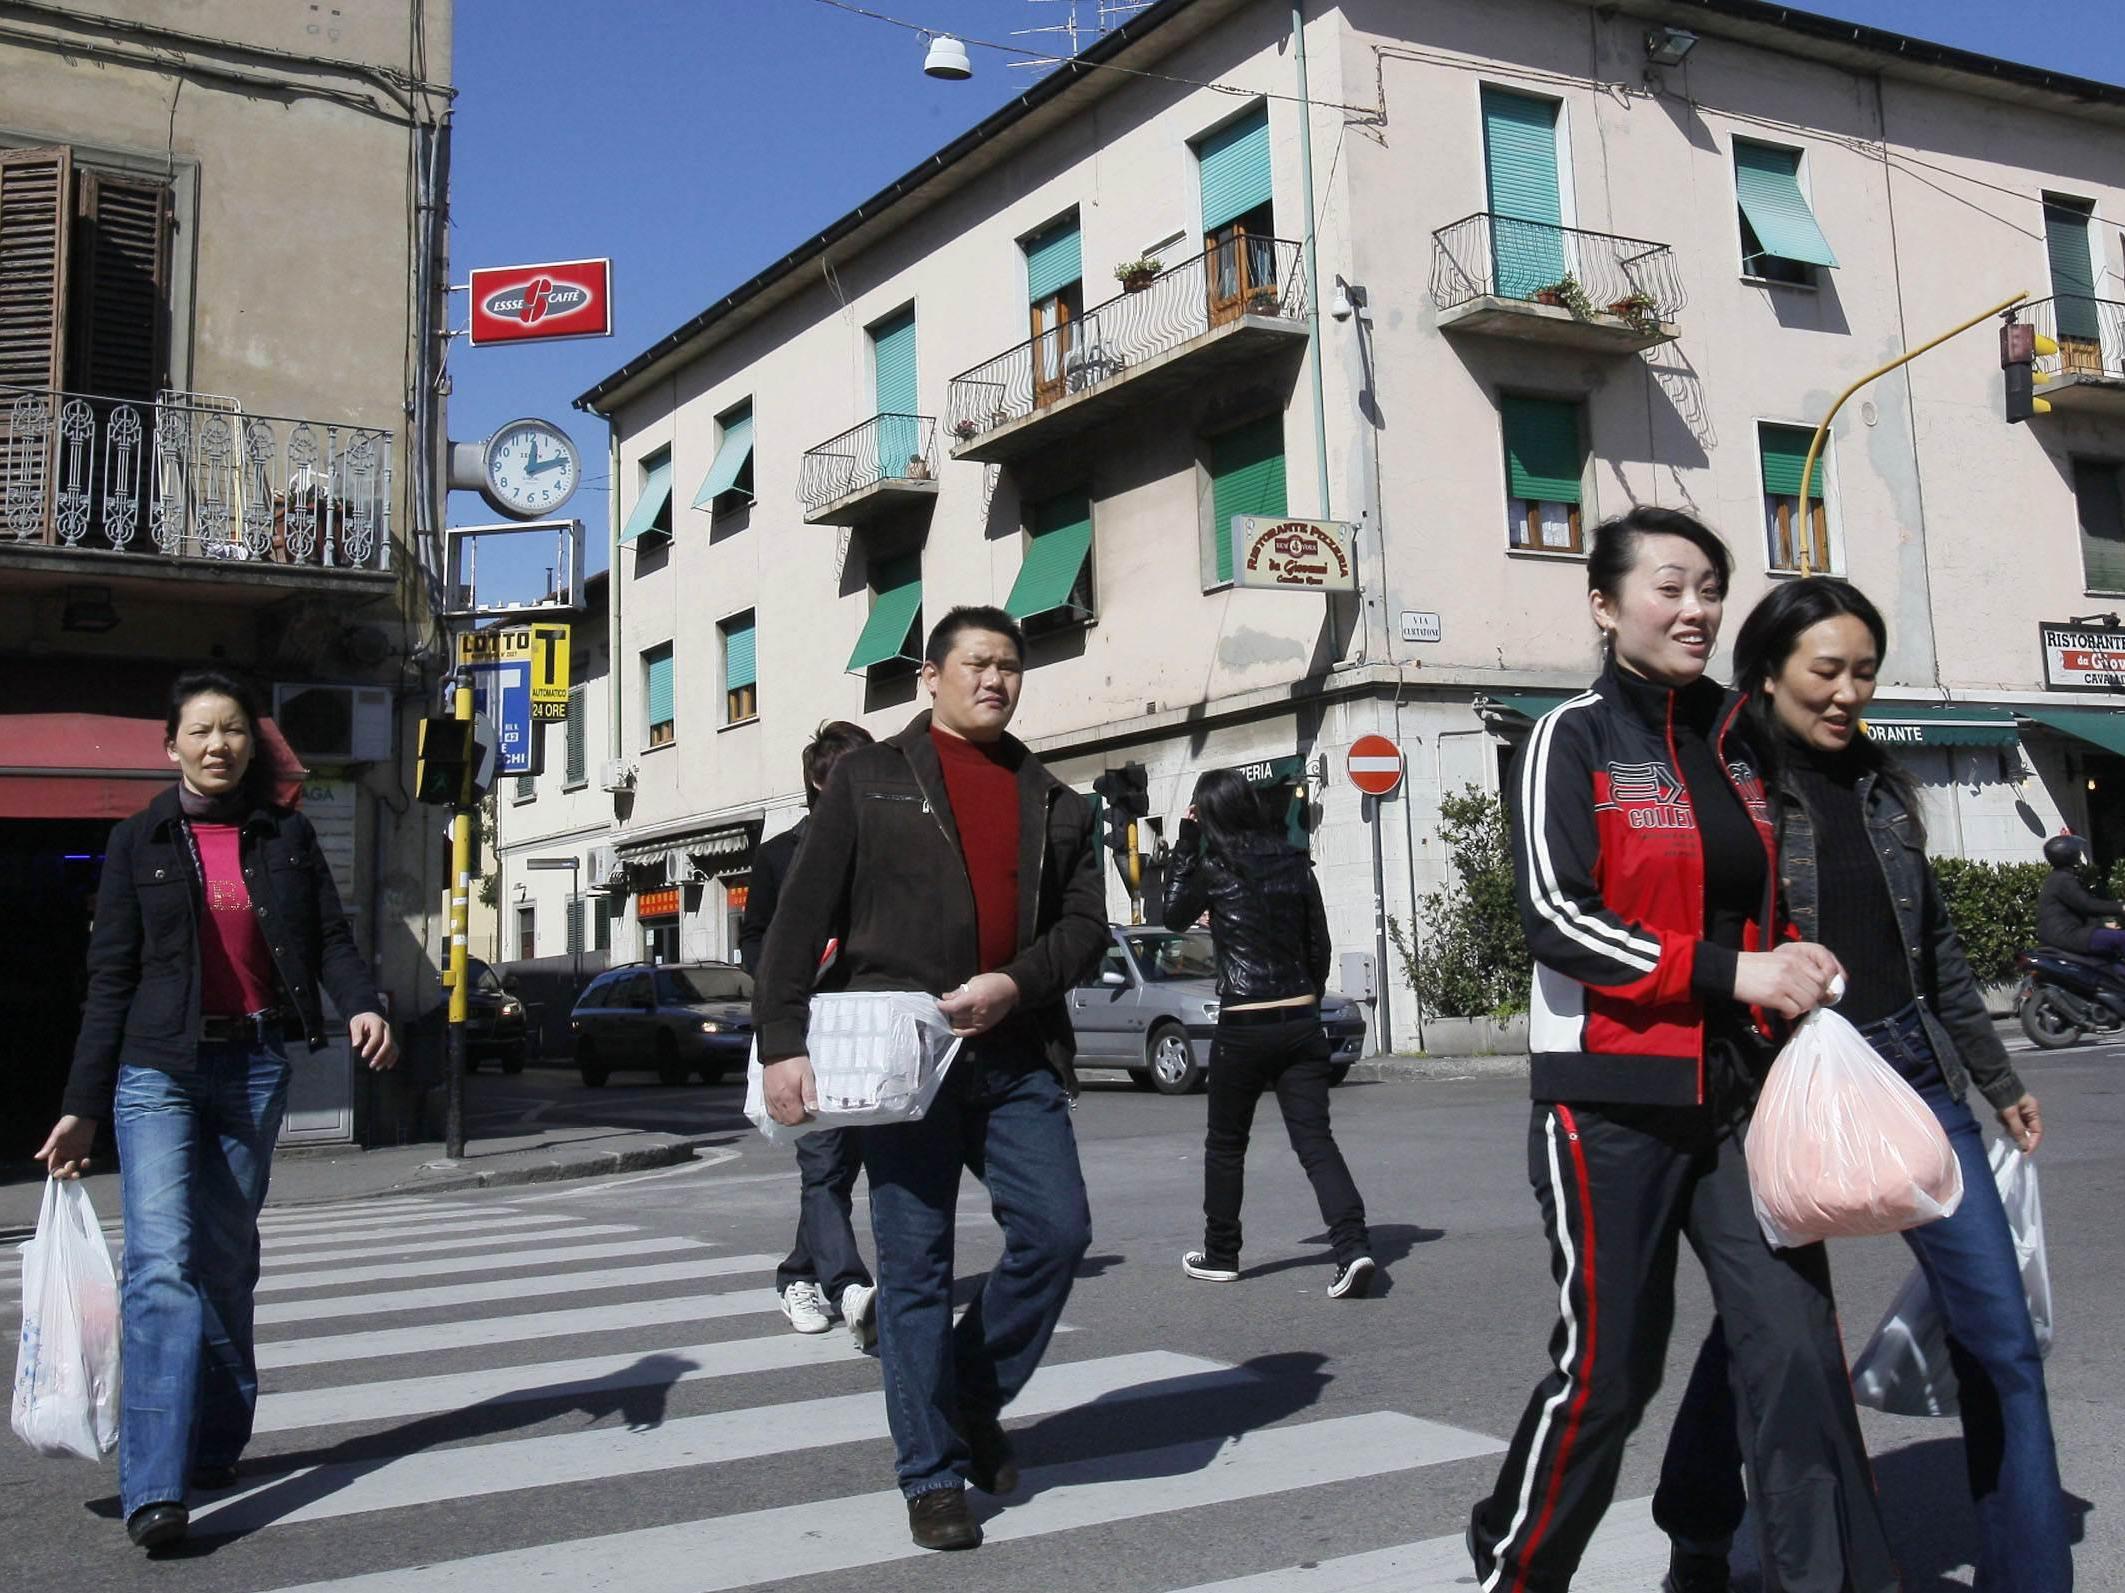 Civic duty: many Chinese people in Italy have sought isolation to protect their neighbours